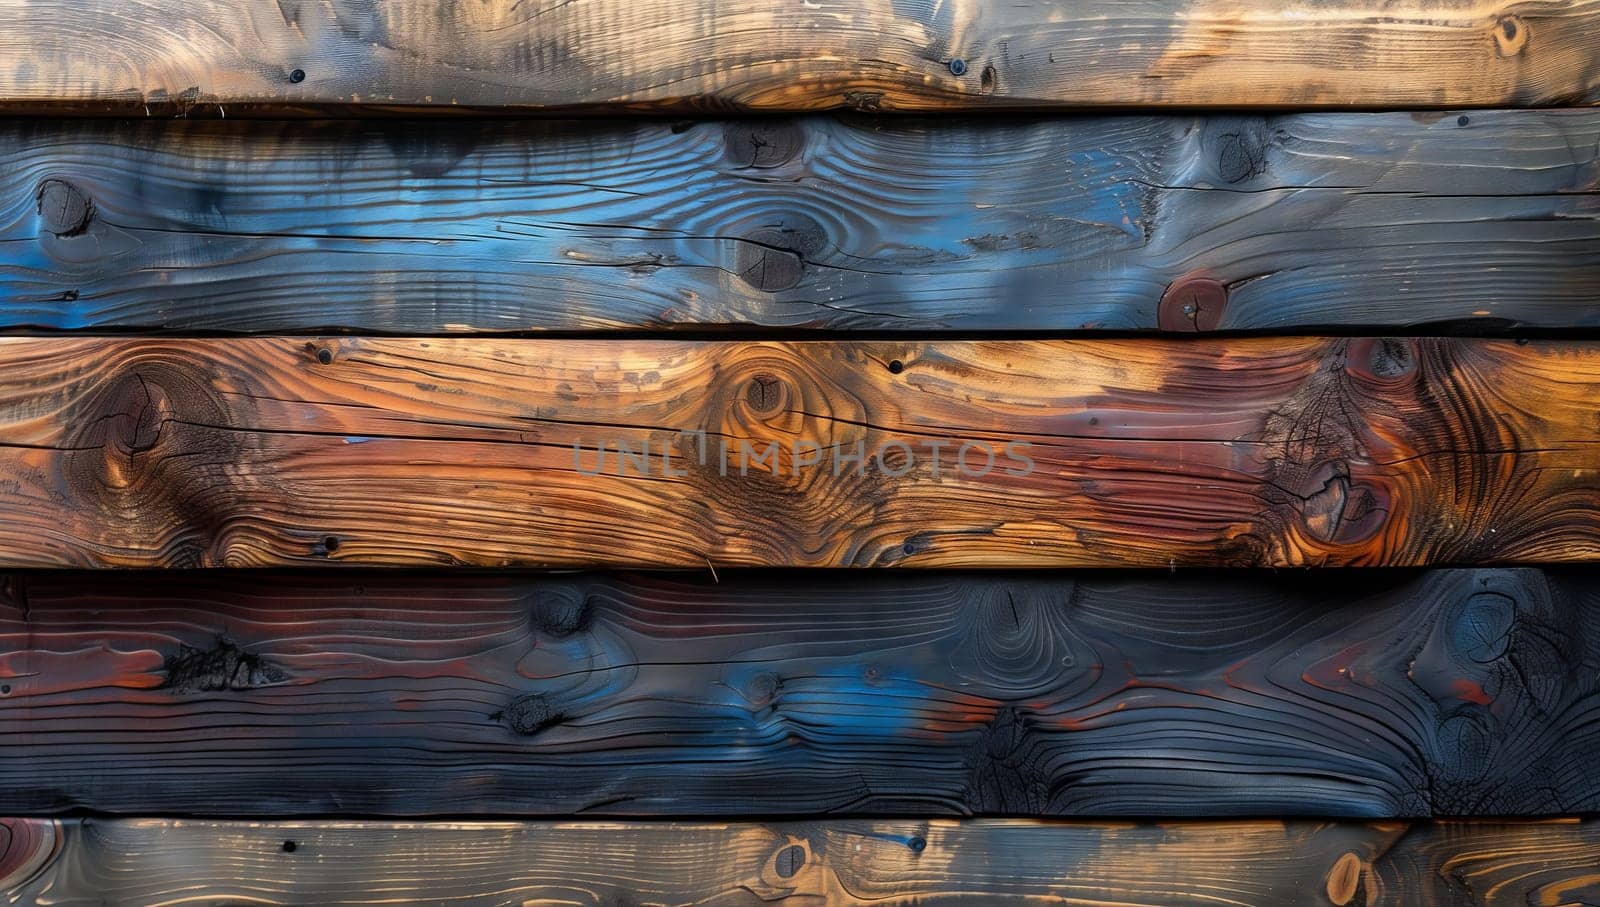 A detailed shot of a hardwood wall constructed with wooden planks, featuring a beautiful wood stain in an electric blue color, creating a unique pattern reminiscent of automotive exterior design